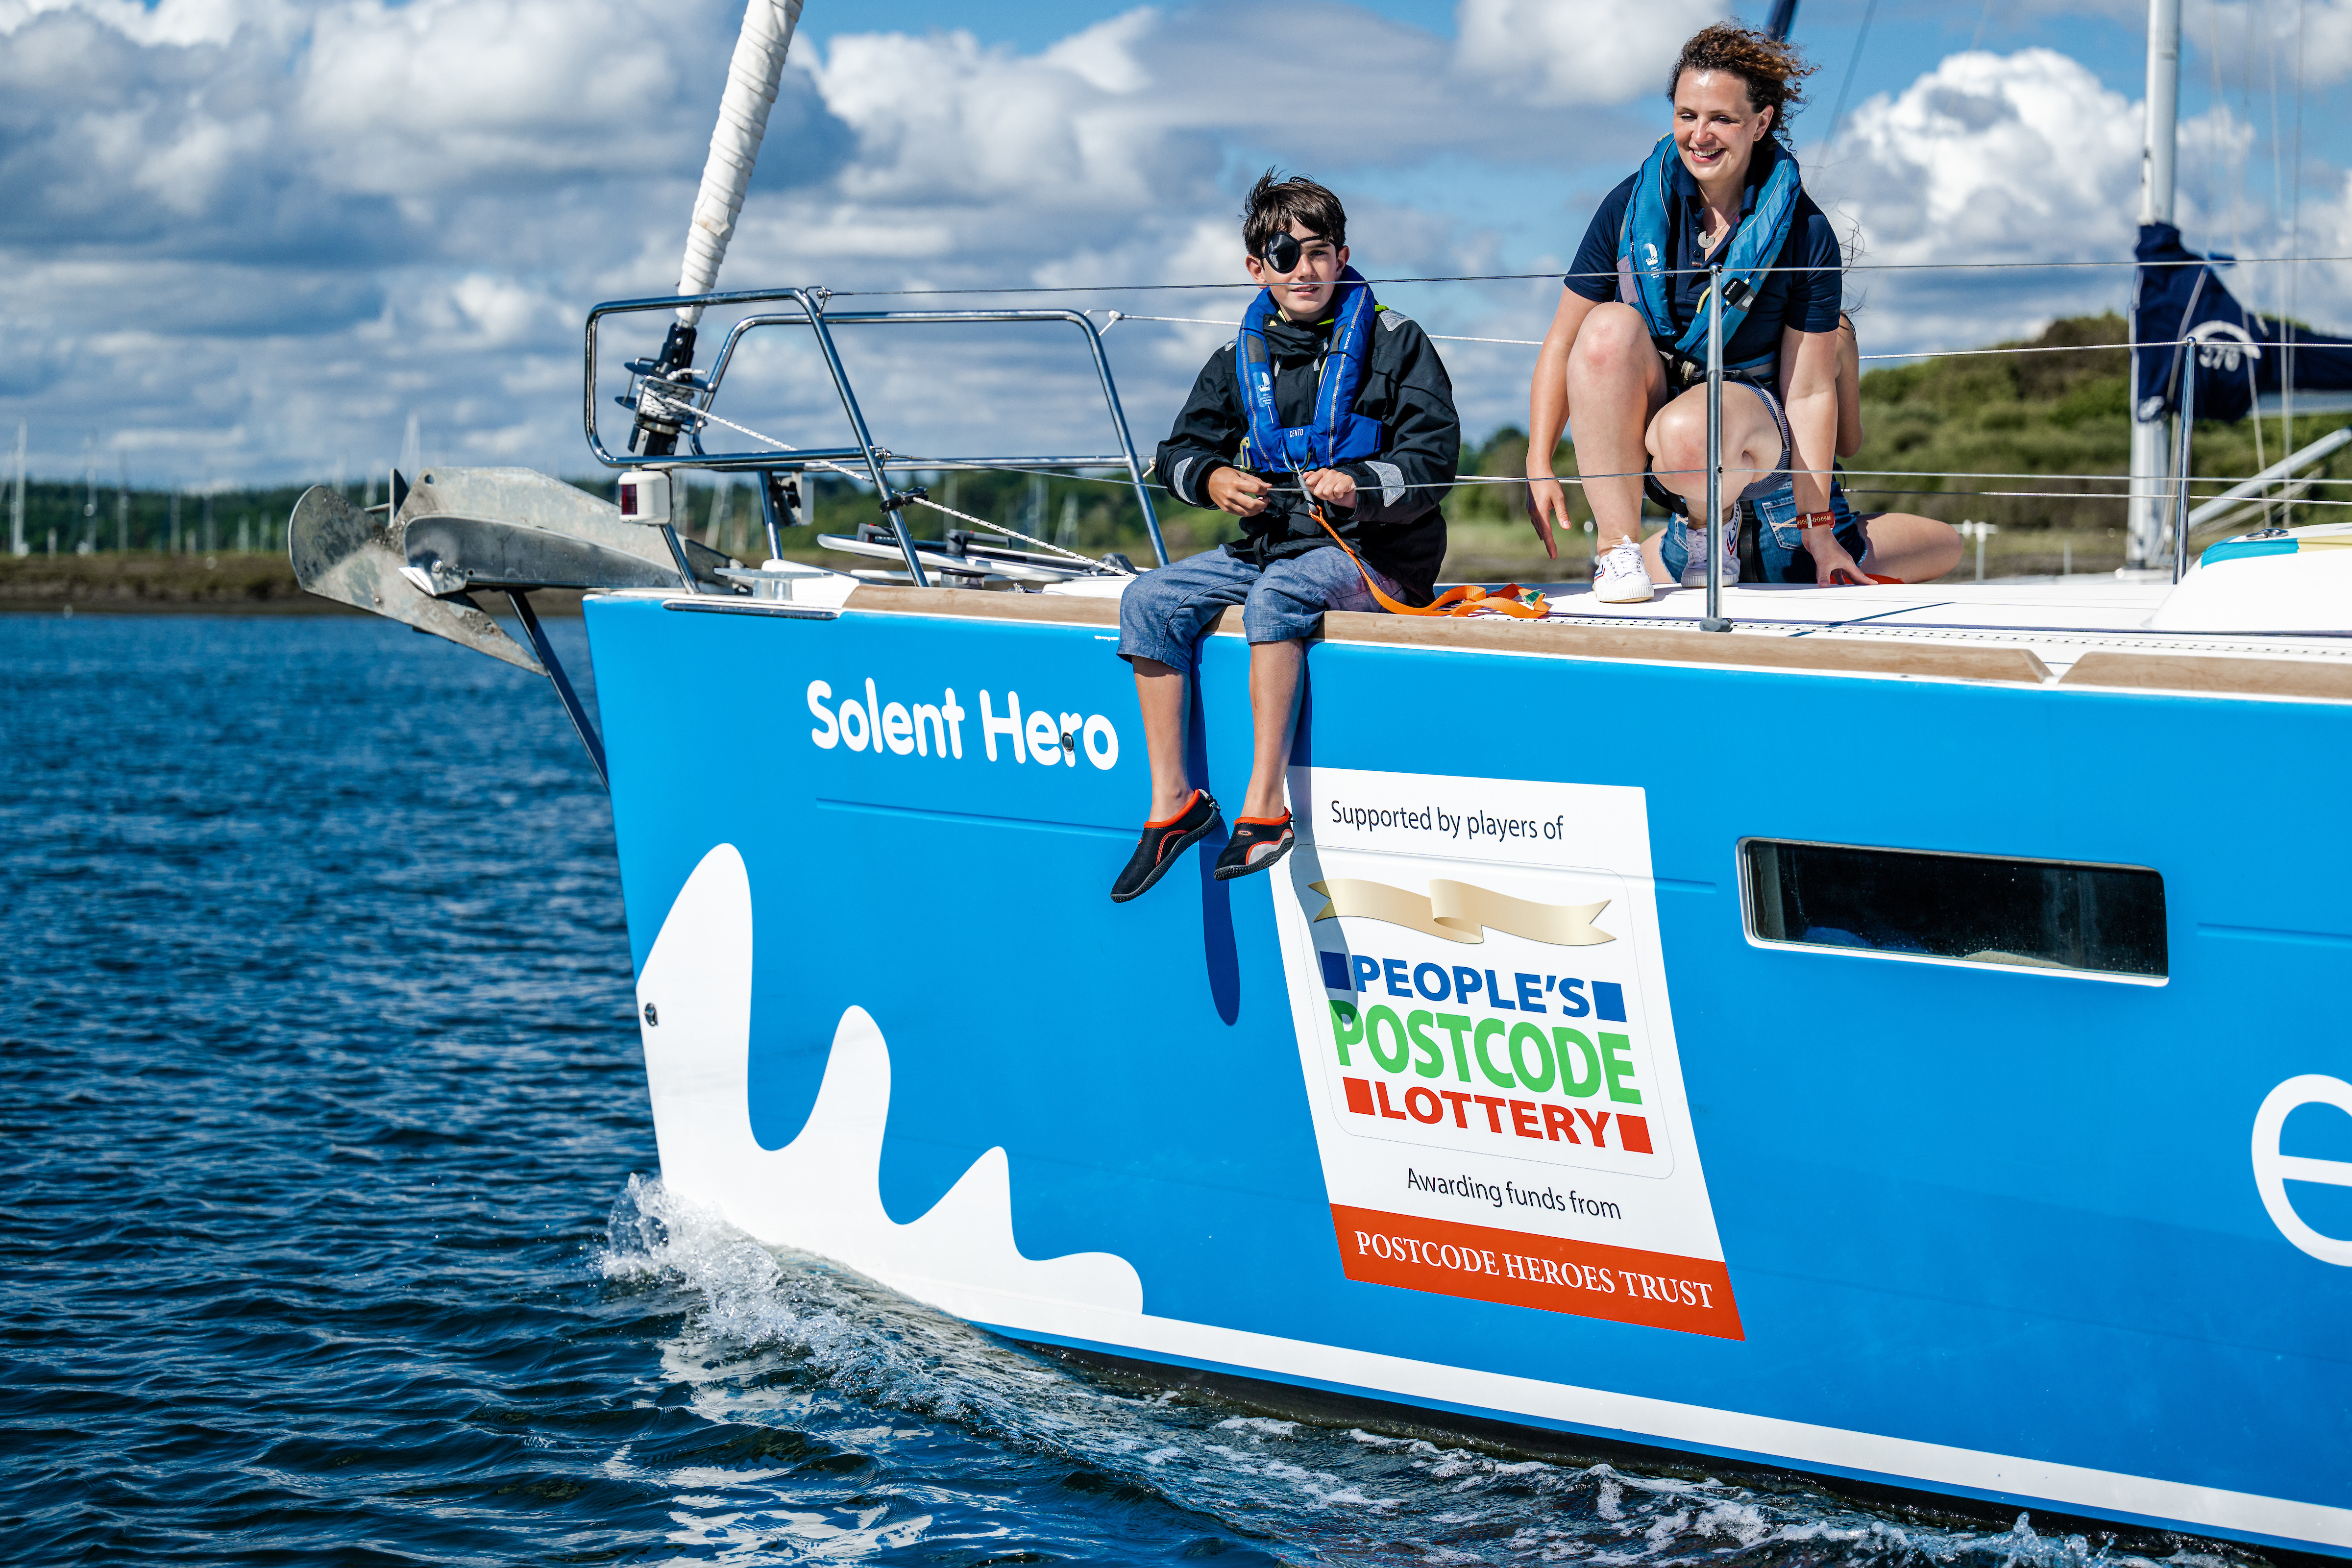 The Trust's yacht Solent Hero on a sunny day with a young person sitting with their legs over the side, with a focus on the People's Postcode Lottery on the bow